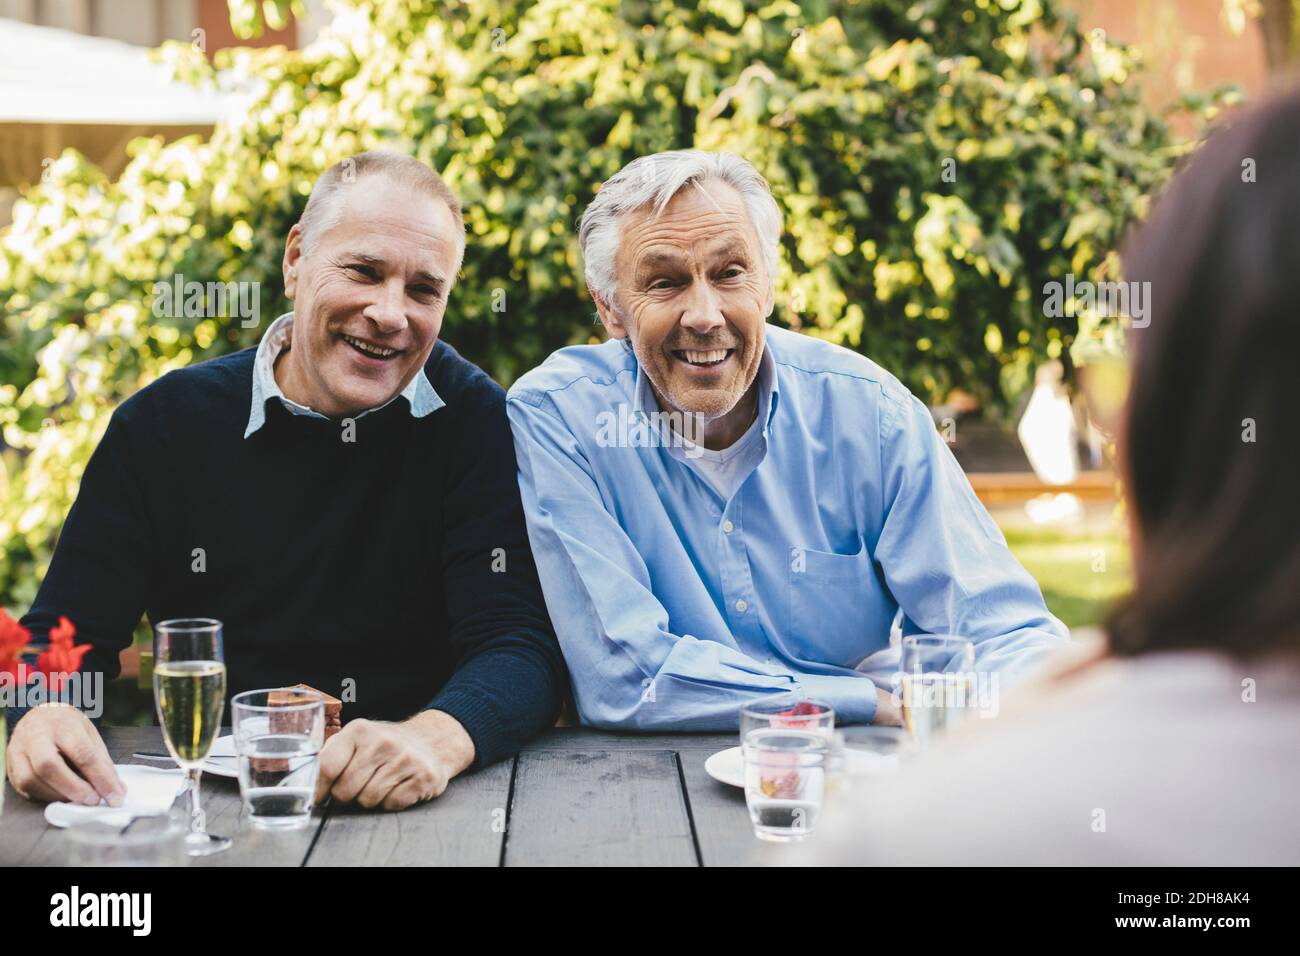 Happy senior men looking at female friend at cafe table Stock Photo